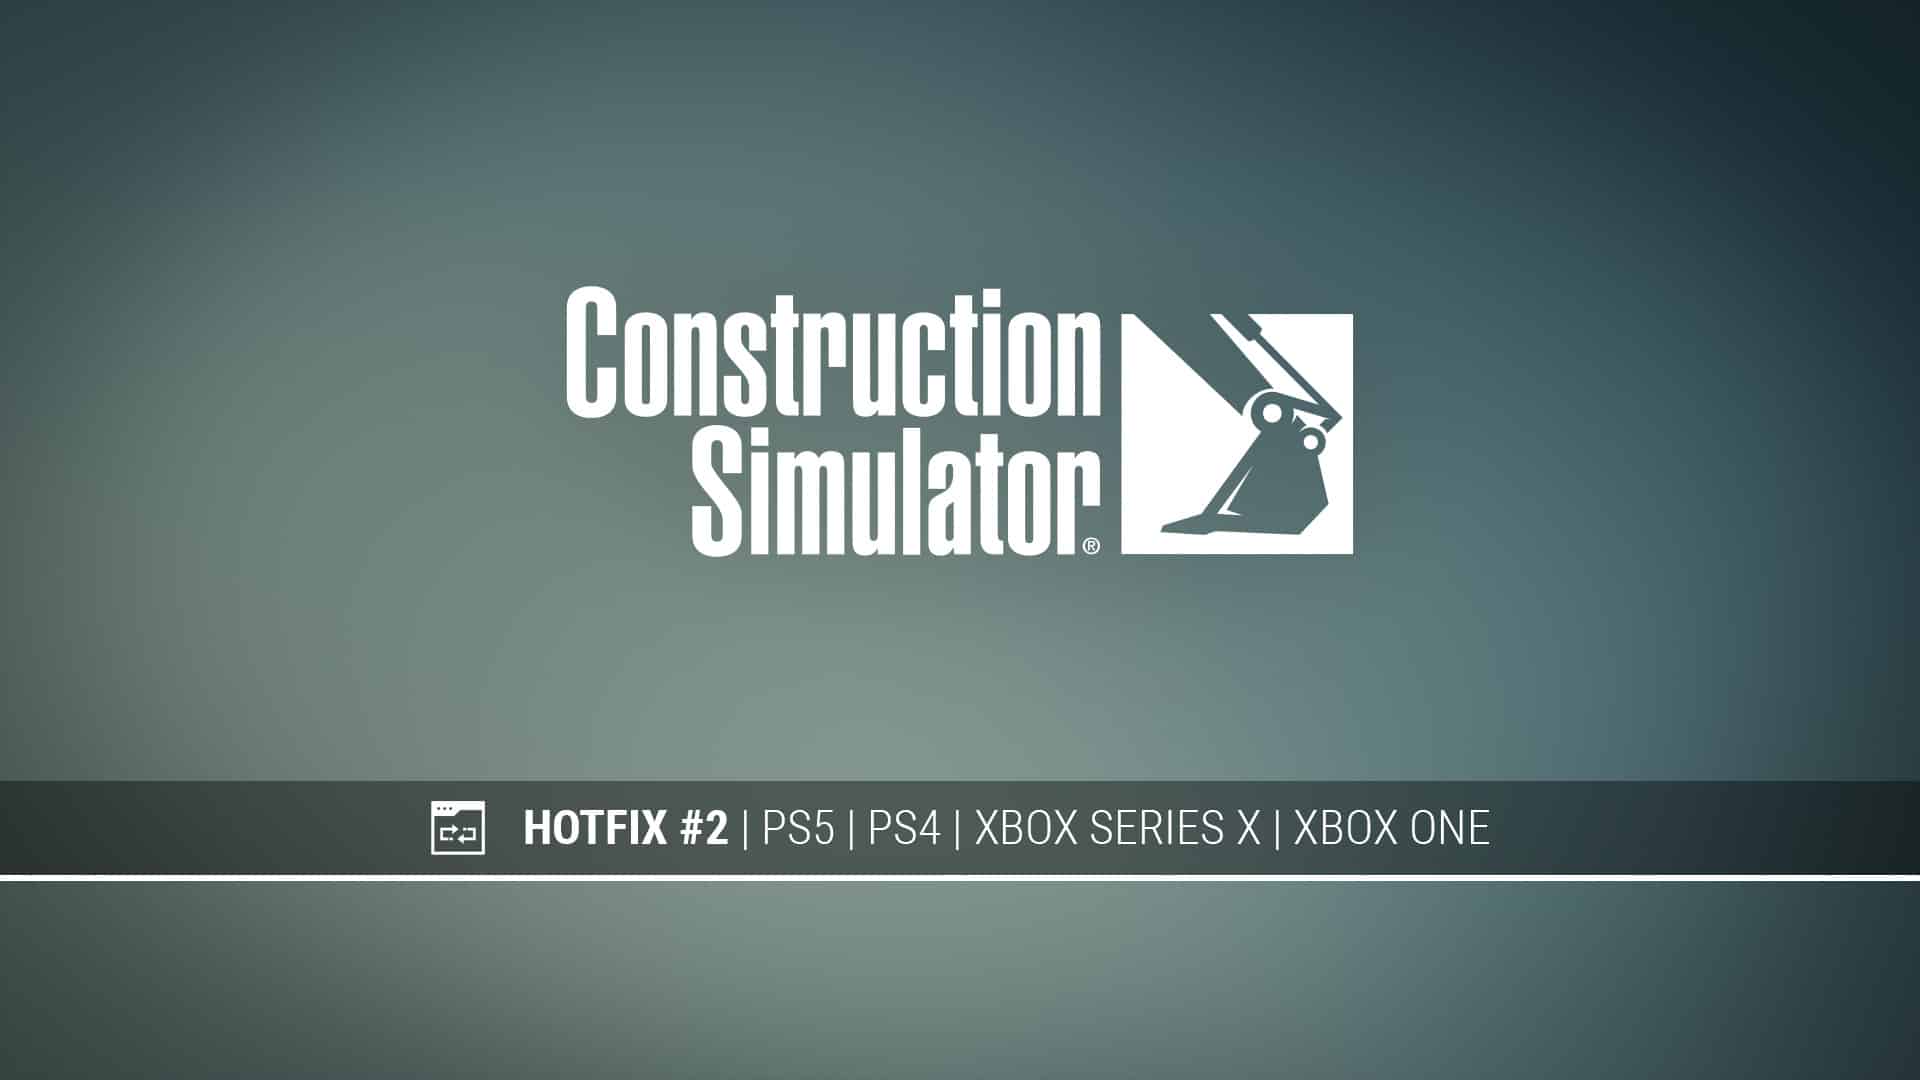 Construction Simulator Update 1.05 Hits Out for Hotfix 2 This October 4